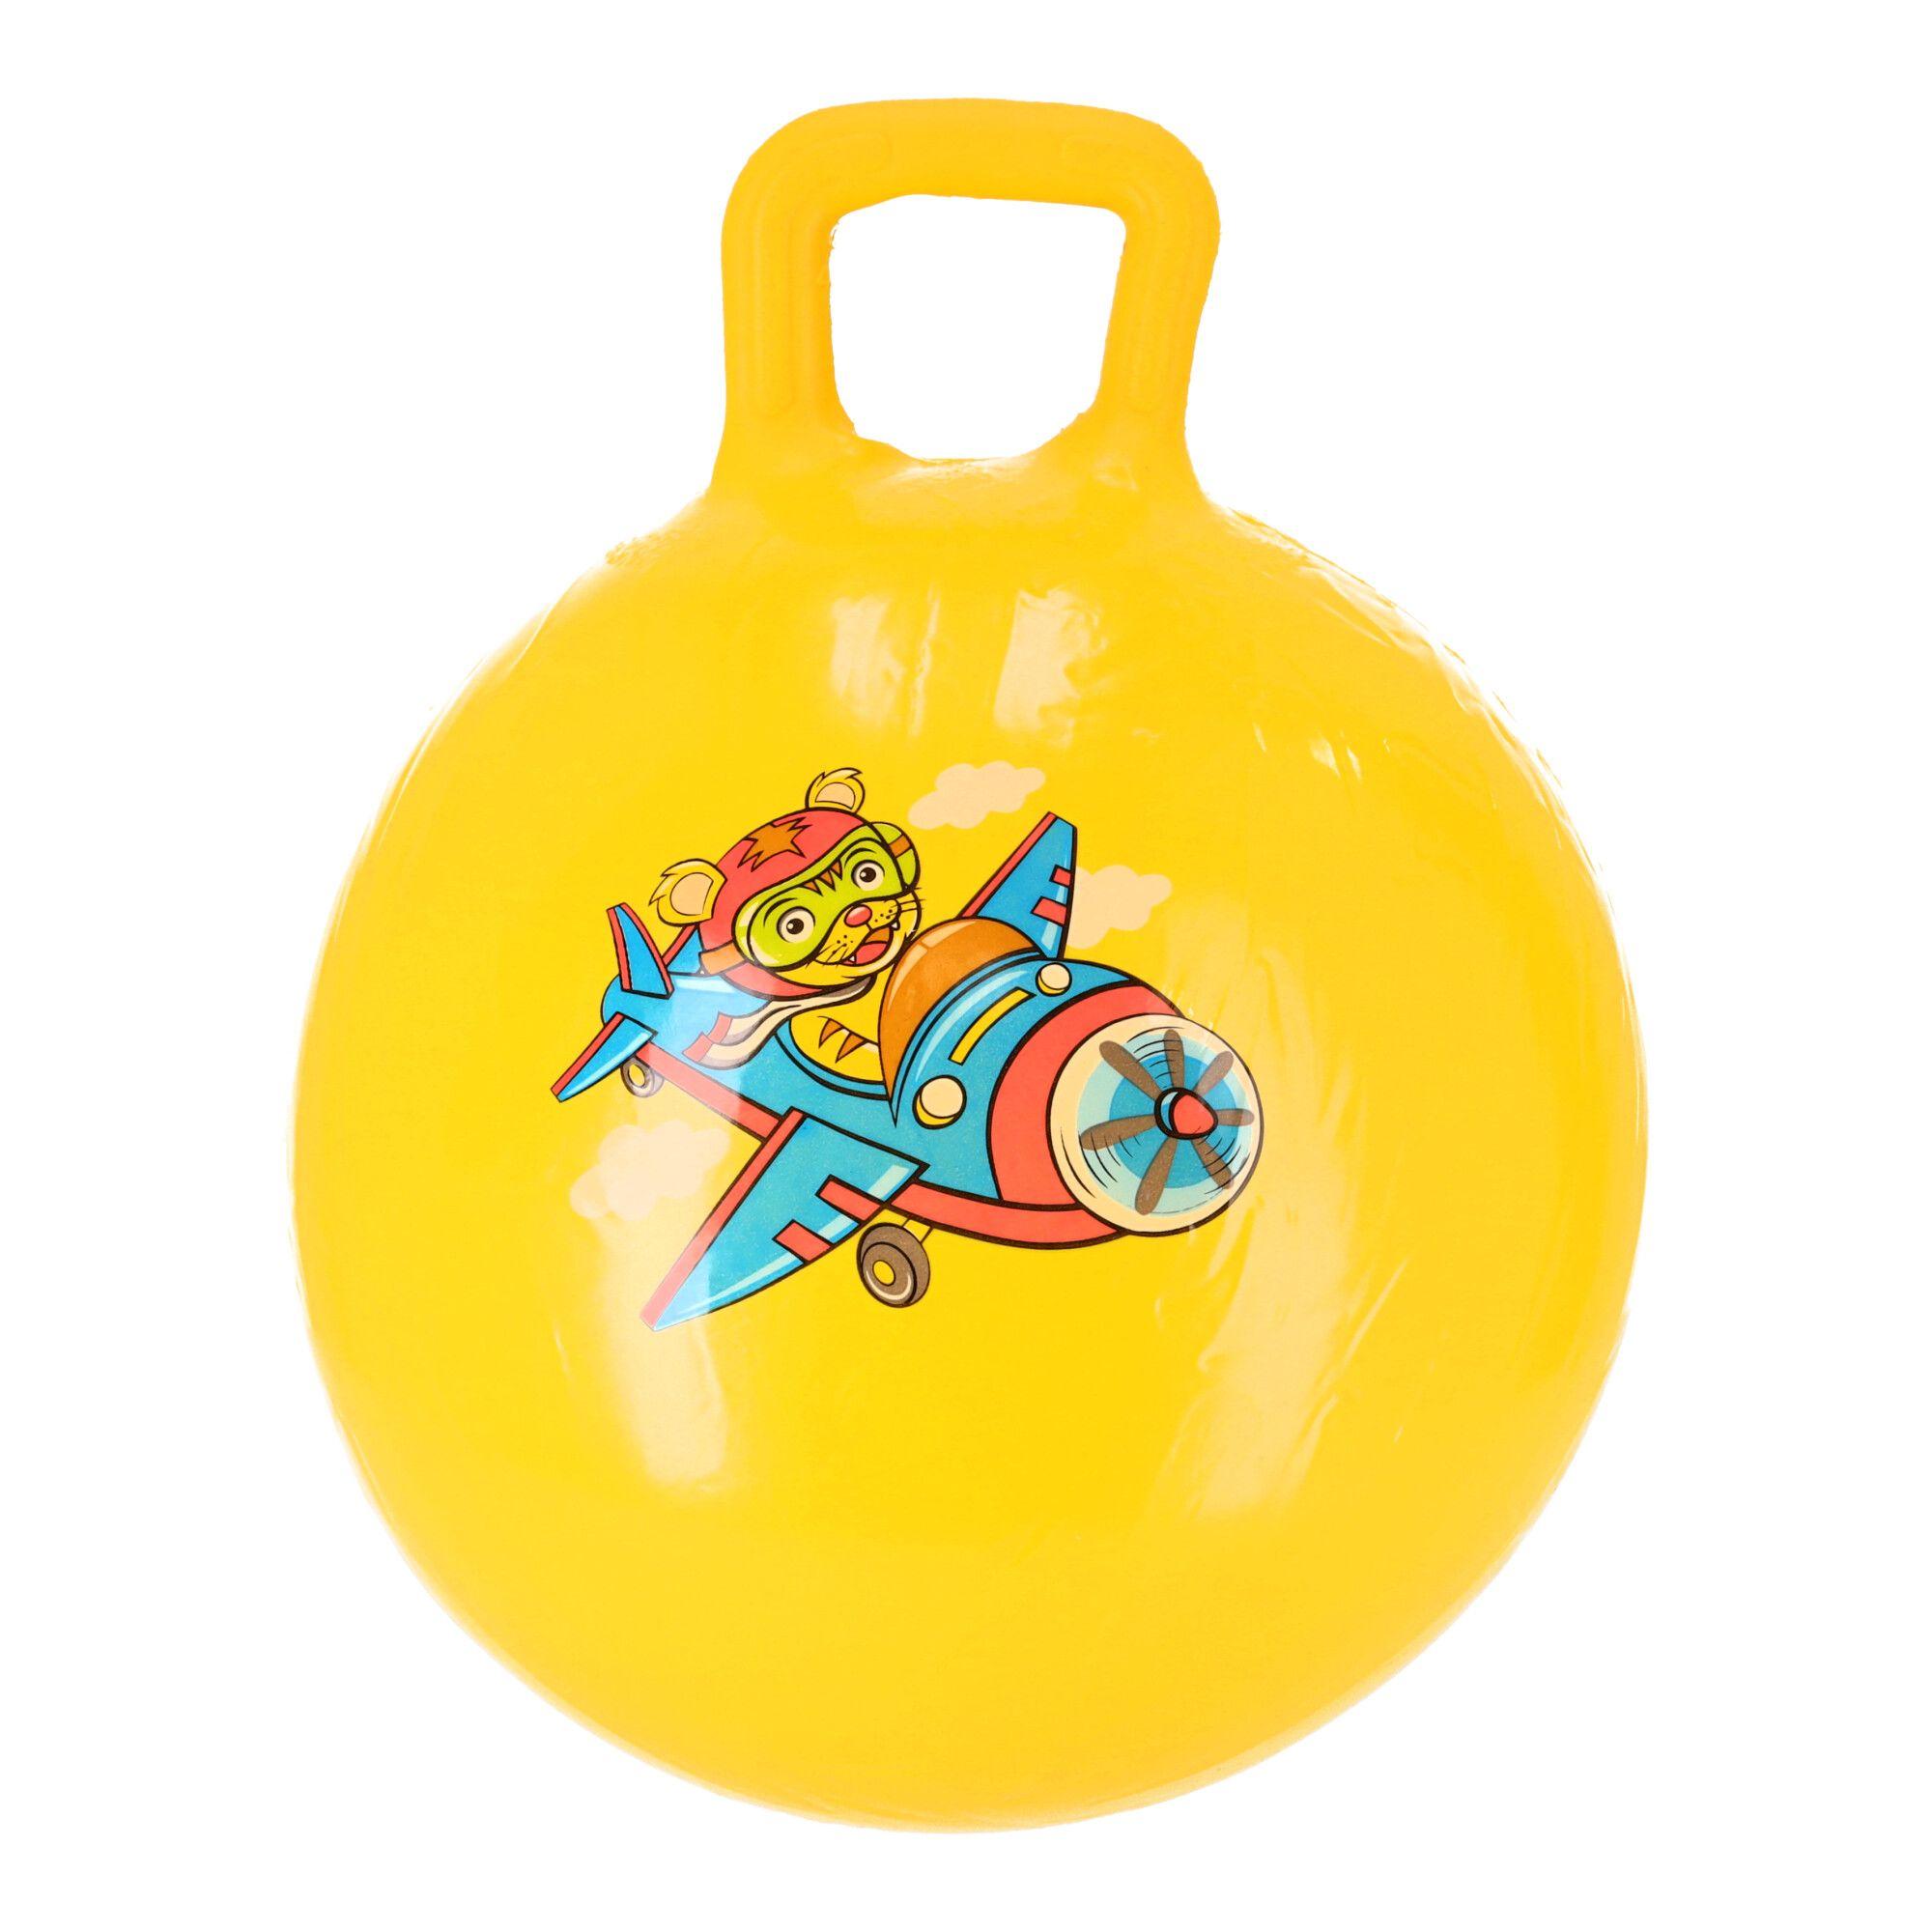 Jumping ball, jumper for children with handles - yellow